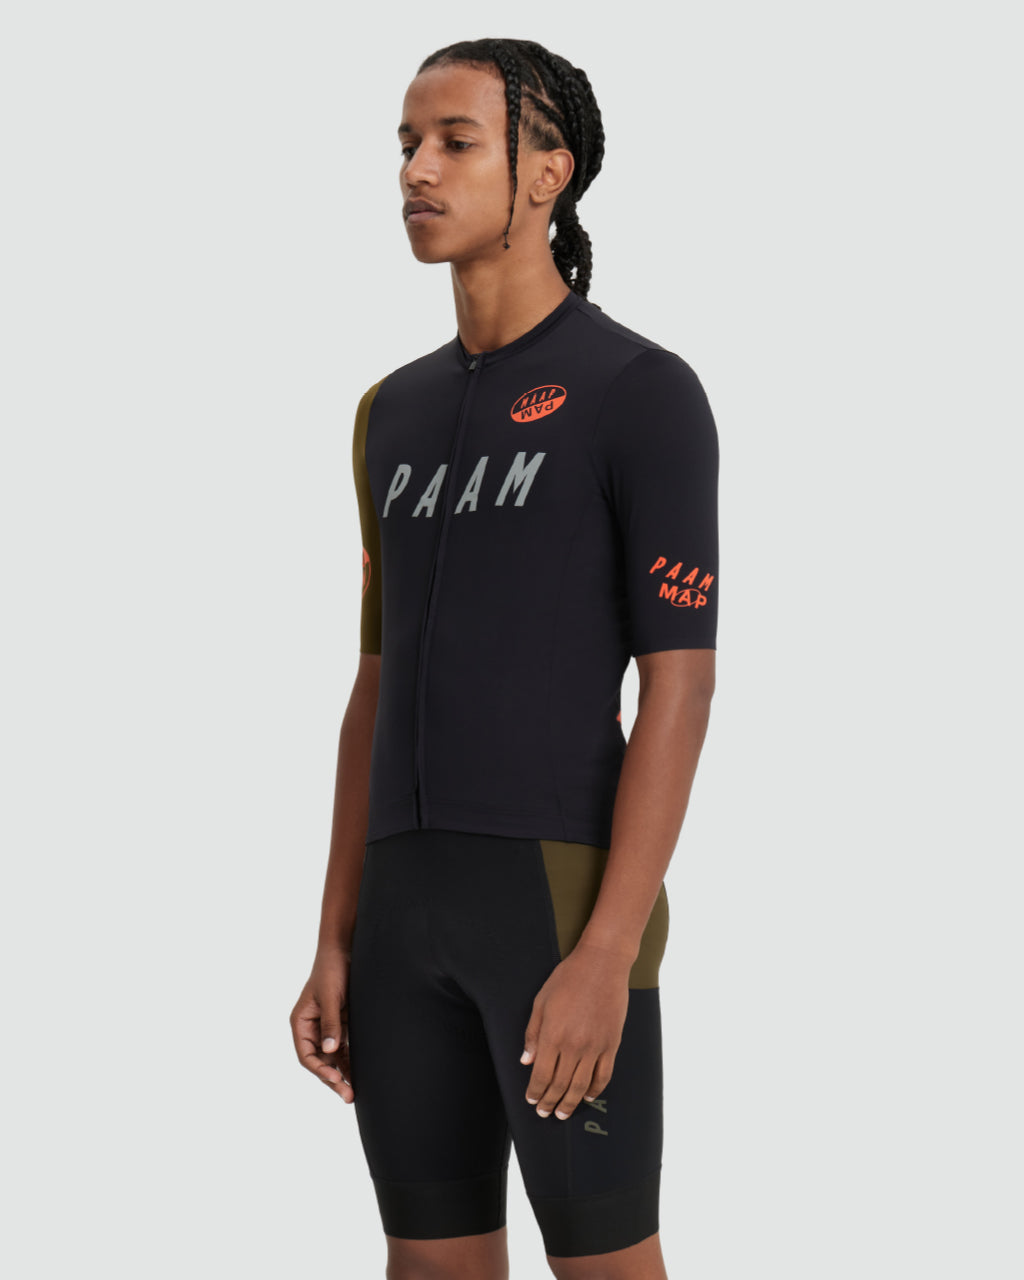 PAAM Team Jersey | MAAP Cycling Apparel